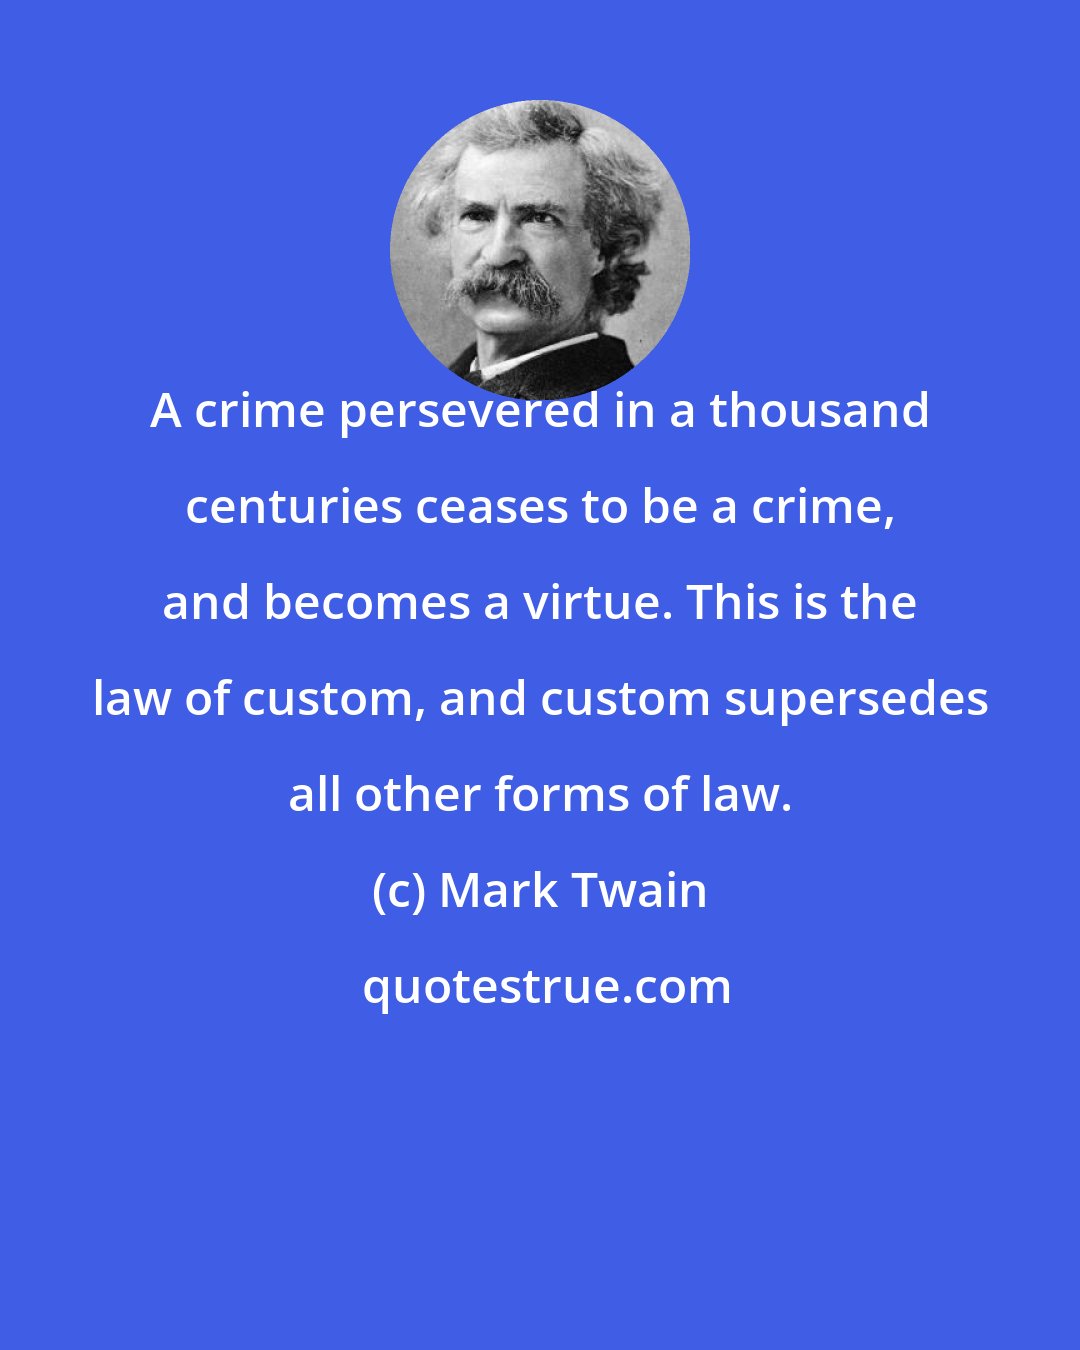 Mark Twain: A crime persevered in a thousand centuries ceases to be a crime, and becomes a virtue. This is the law of custom, and custom supersedes all other forms of law.